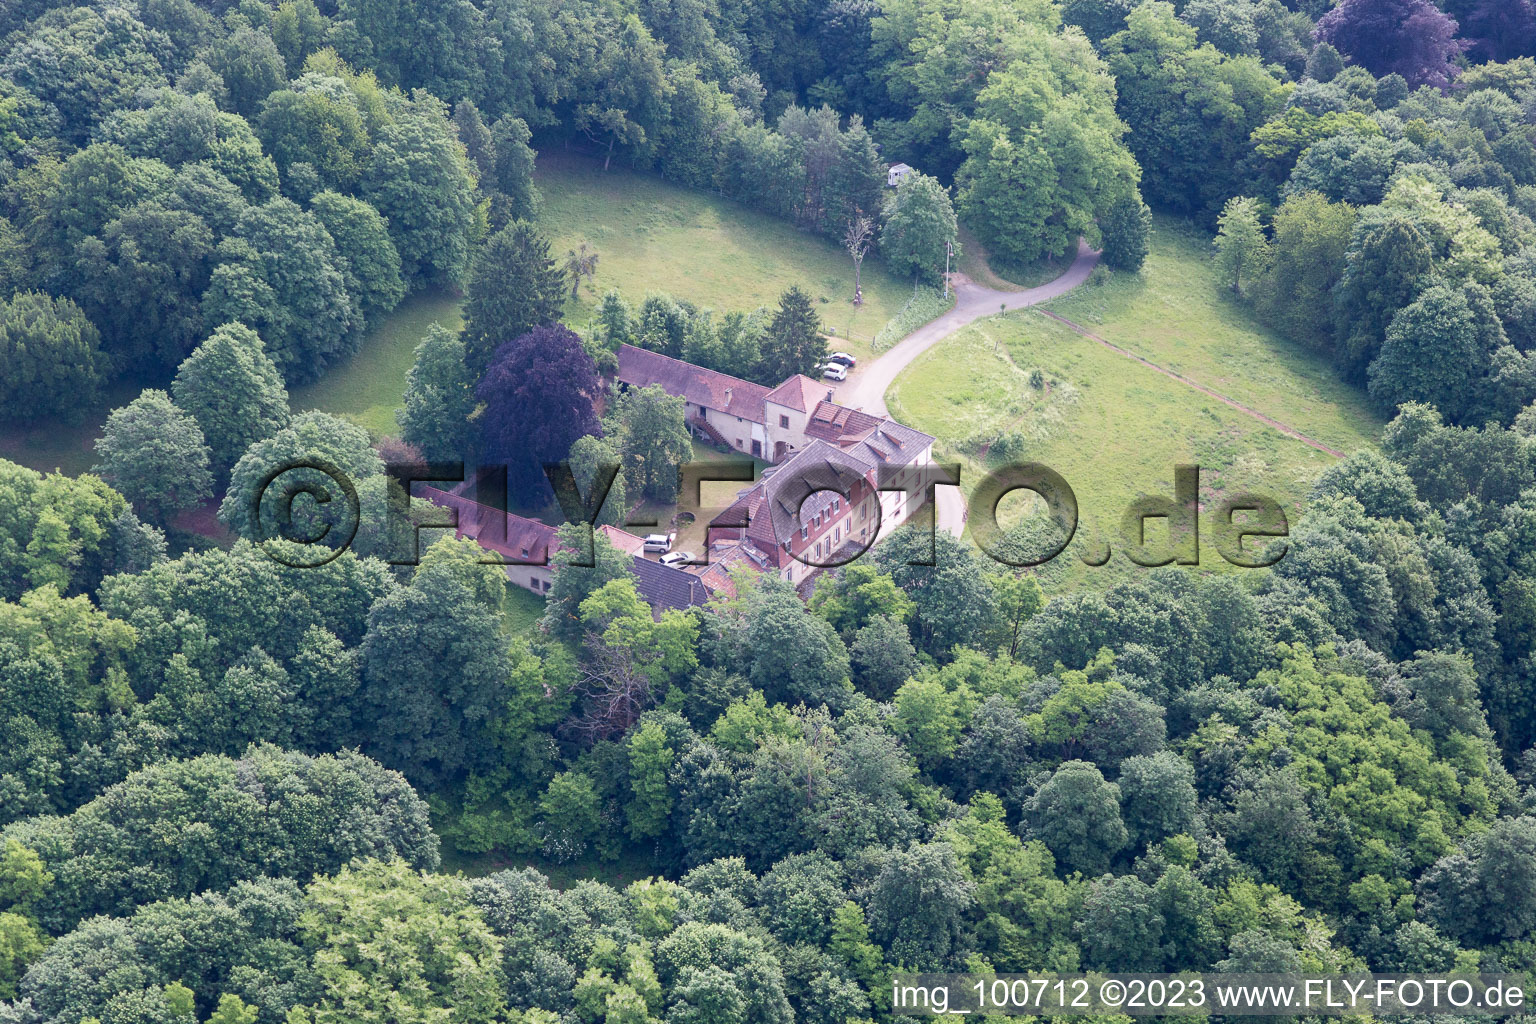 Sankt Germannshof in the state Rhineland-Palatinate, Germany from the drone perspective